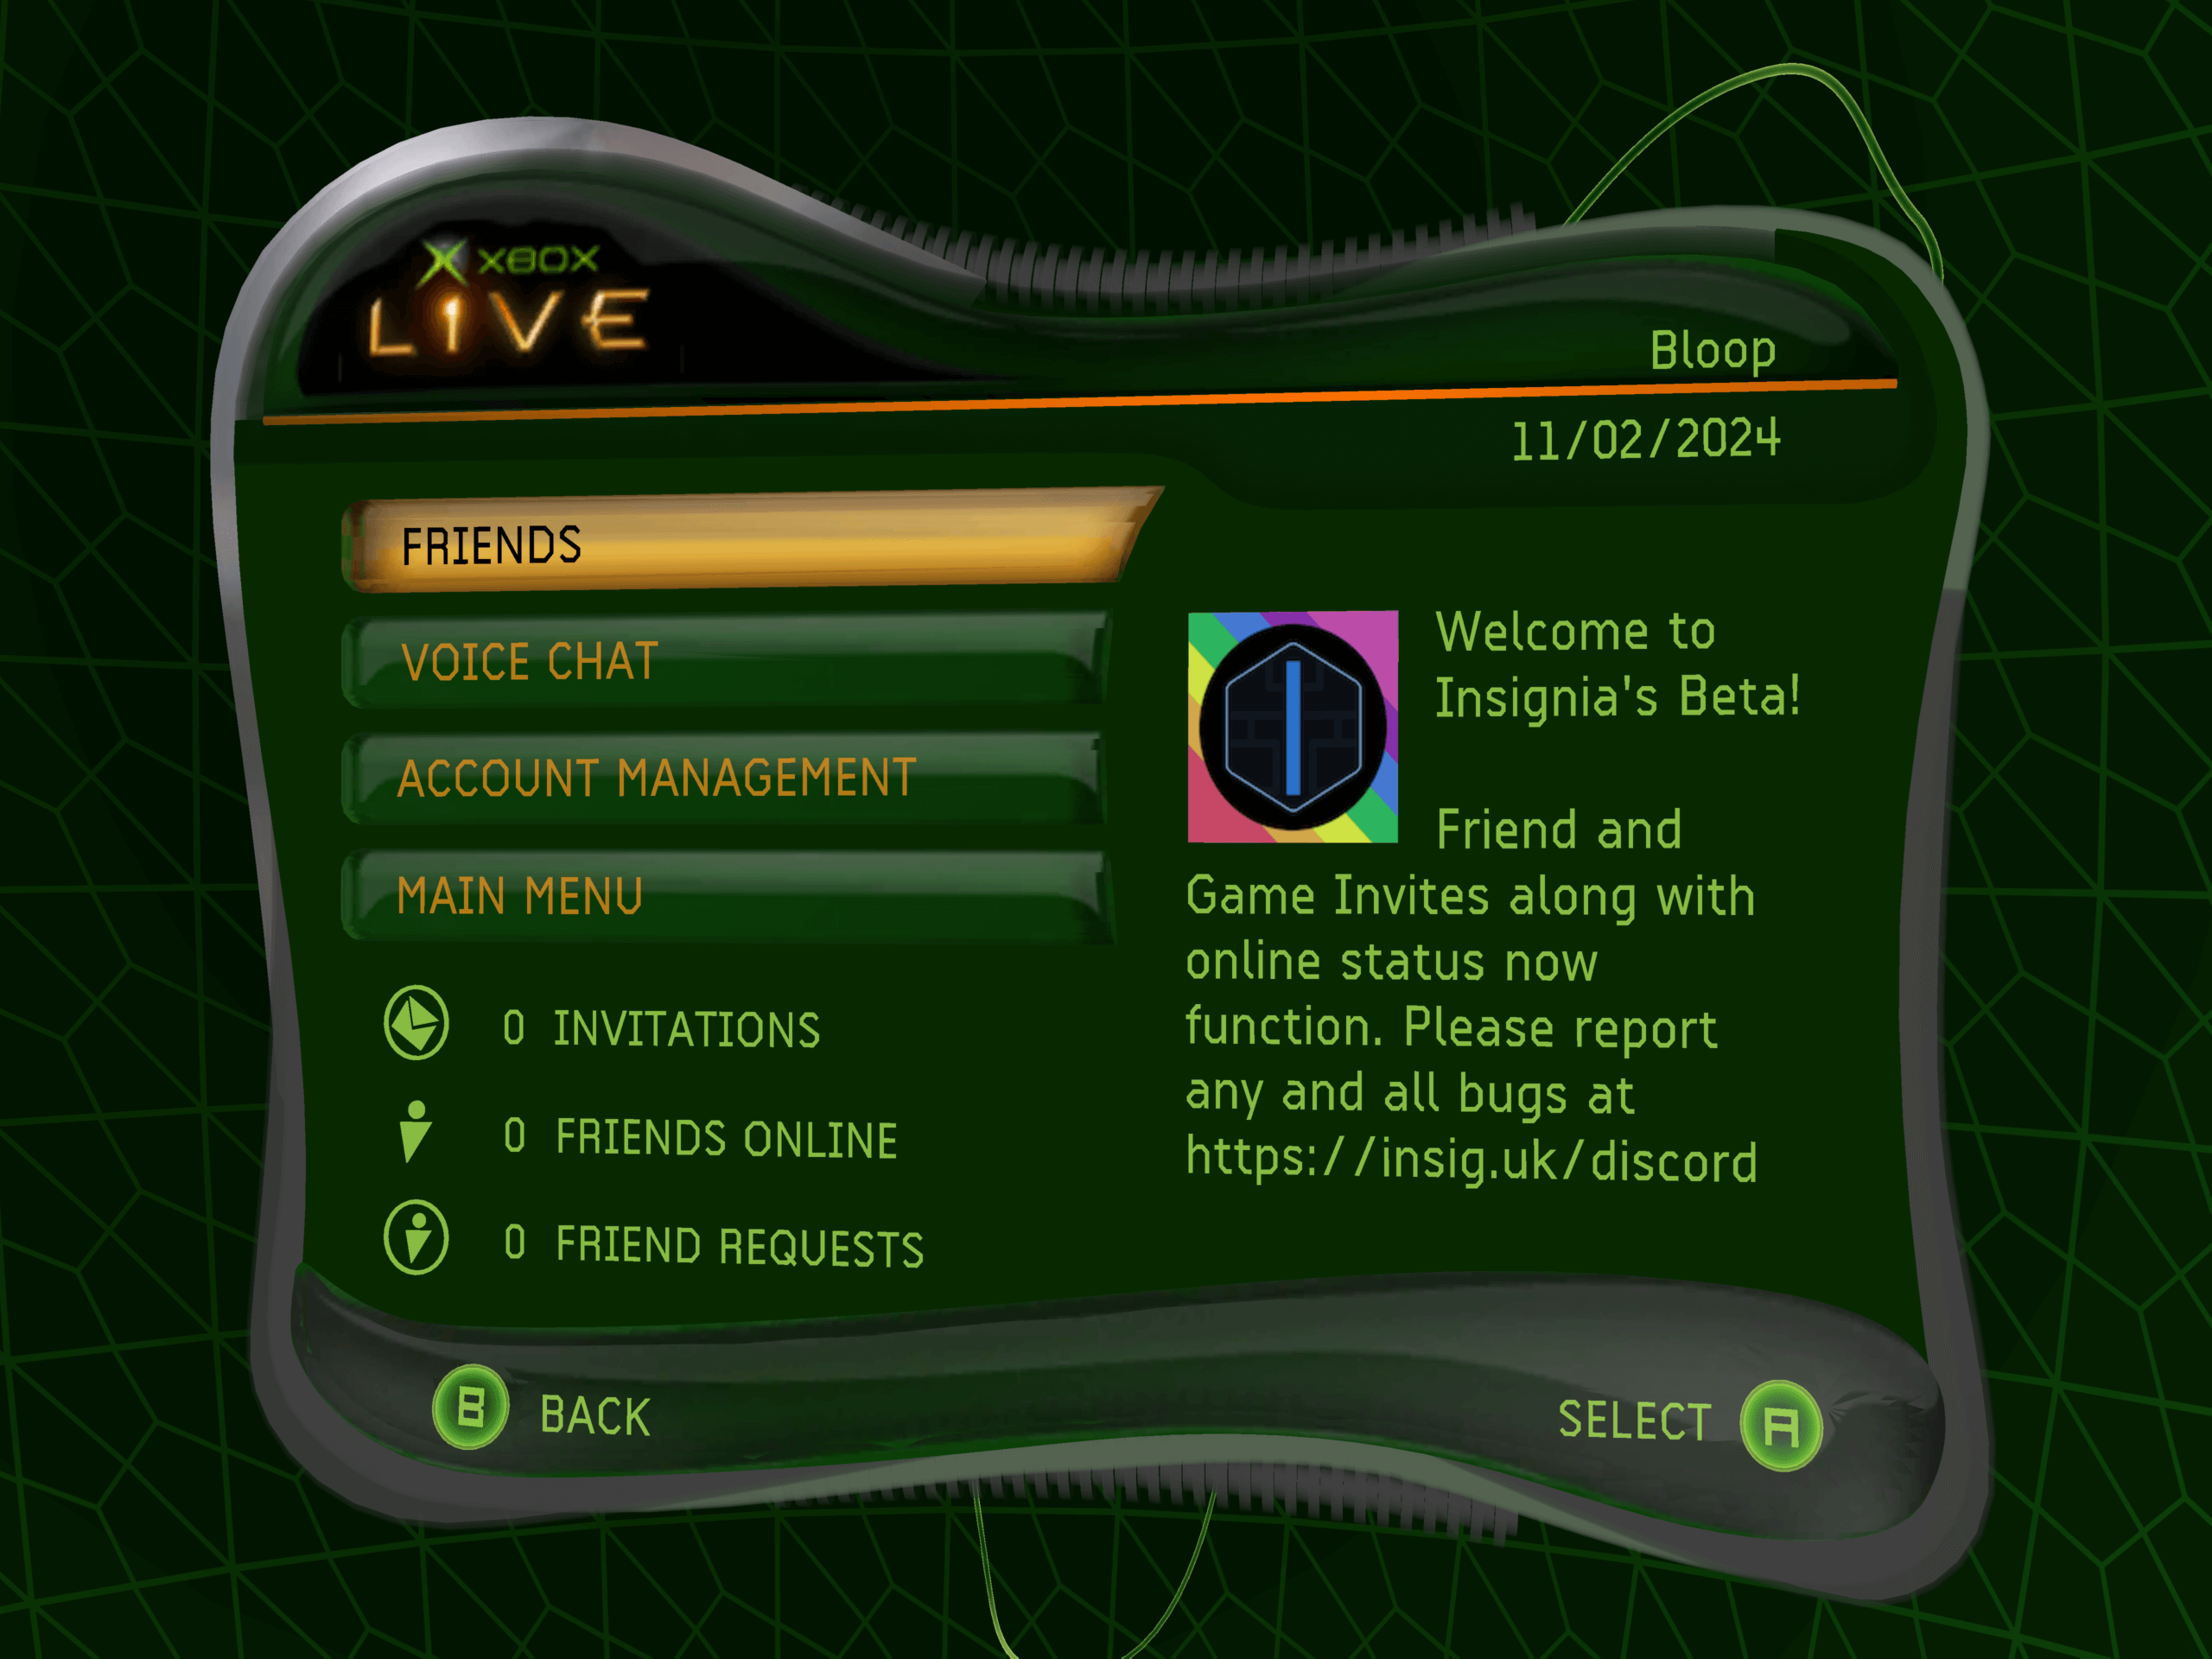 The Xbox Dashboard's Live page, showing the user "Bloop" logged in on 11/02/2024. The sub-menus "Friends", "Voice Chat", and "Account Management" are available, along with a "Sign Out" option that returns the user to the Dashboard. The Insignia logo is shown to the right of these menu options, with the following Message: "Welcome to Insignia's Beta! Friend and Game Invites along with online status now function. Please report any and all bugs at https://insig.uk/discord"